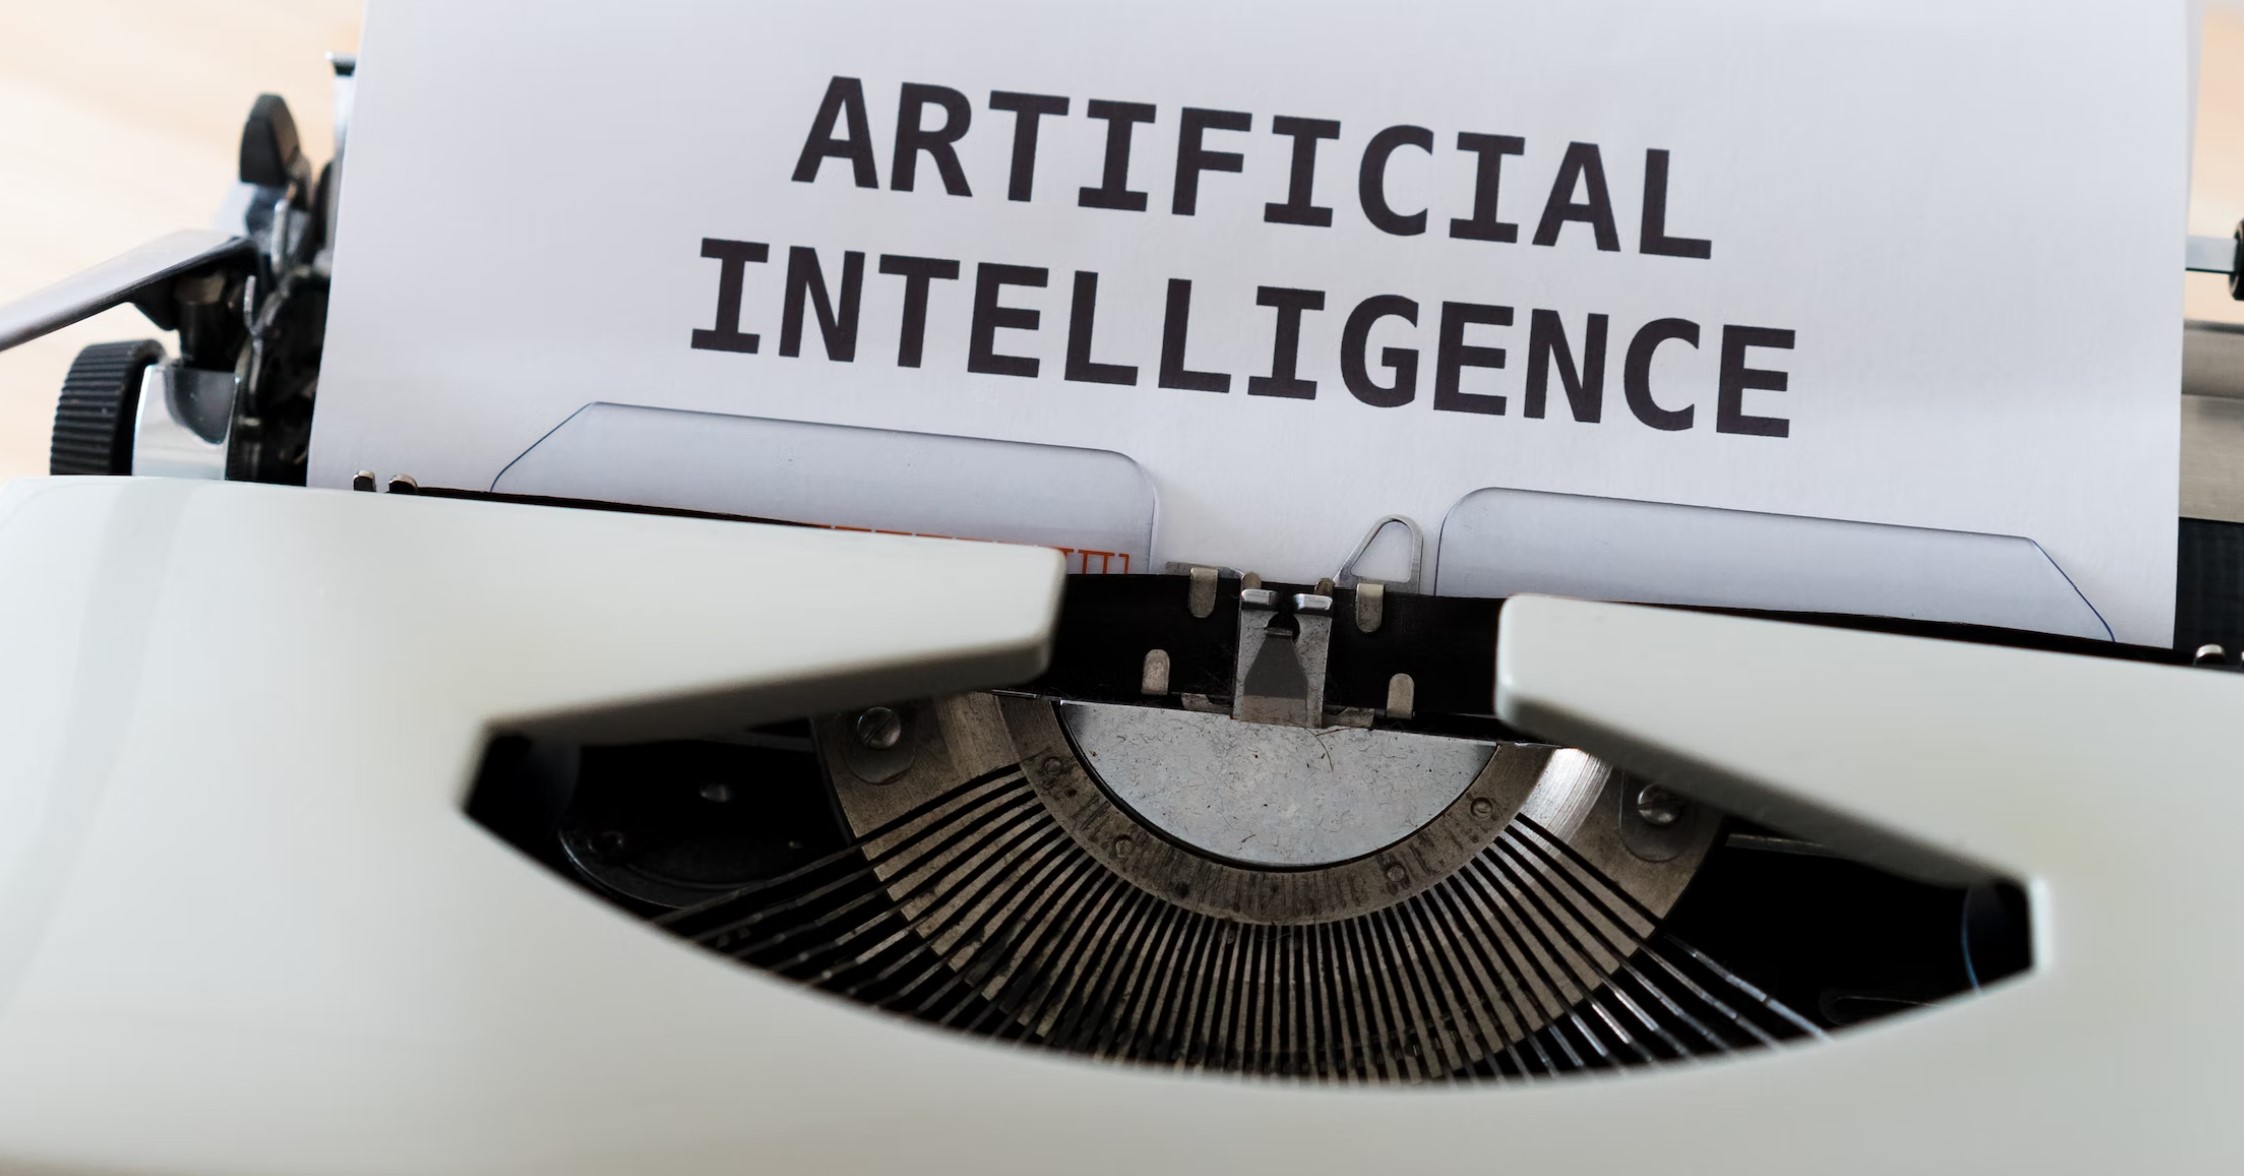 Artificial Intelligence for writing